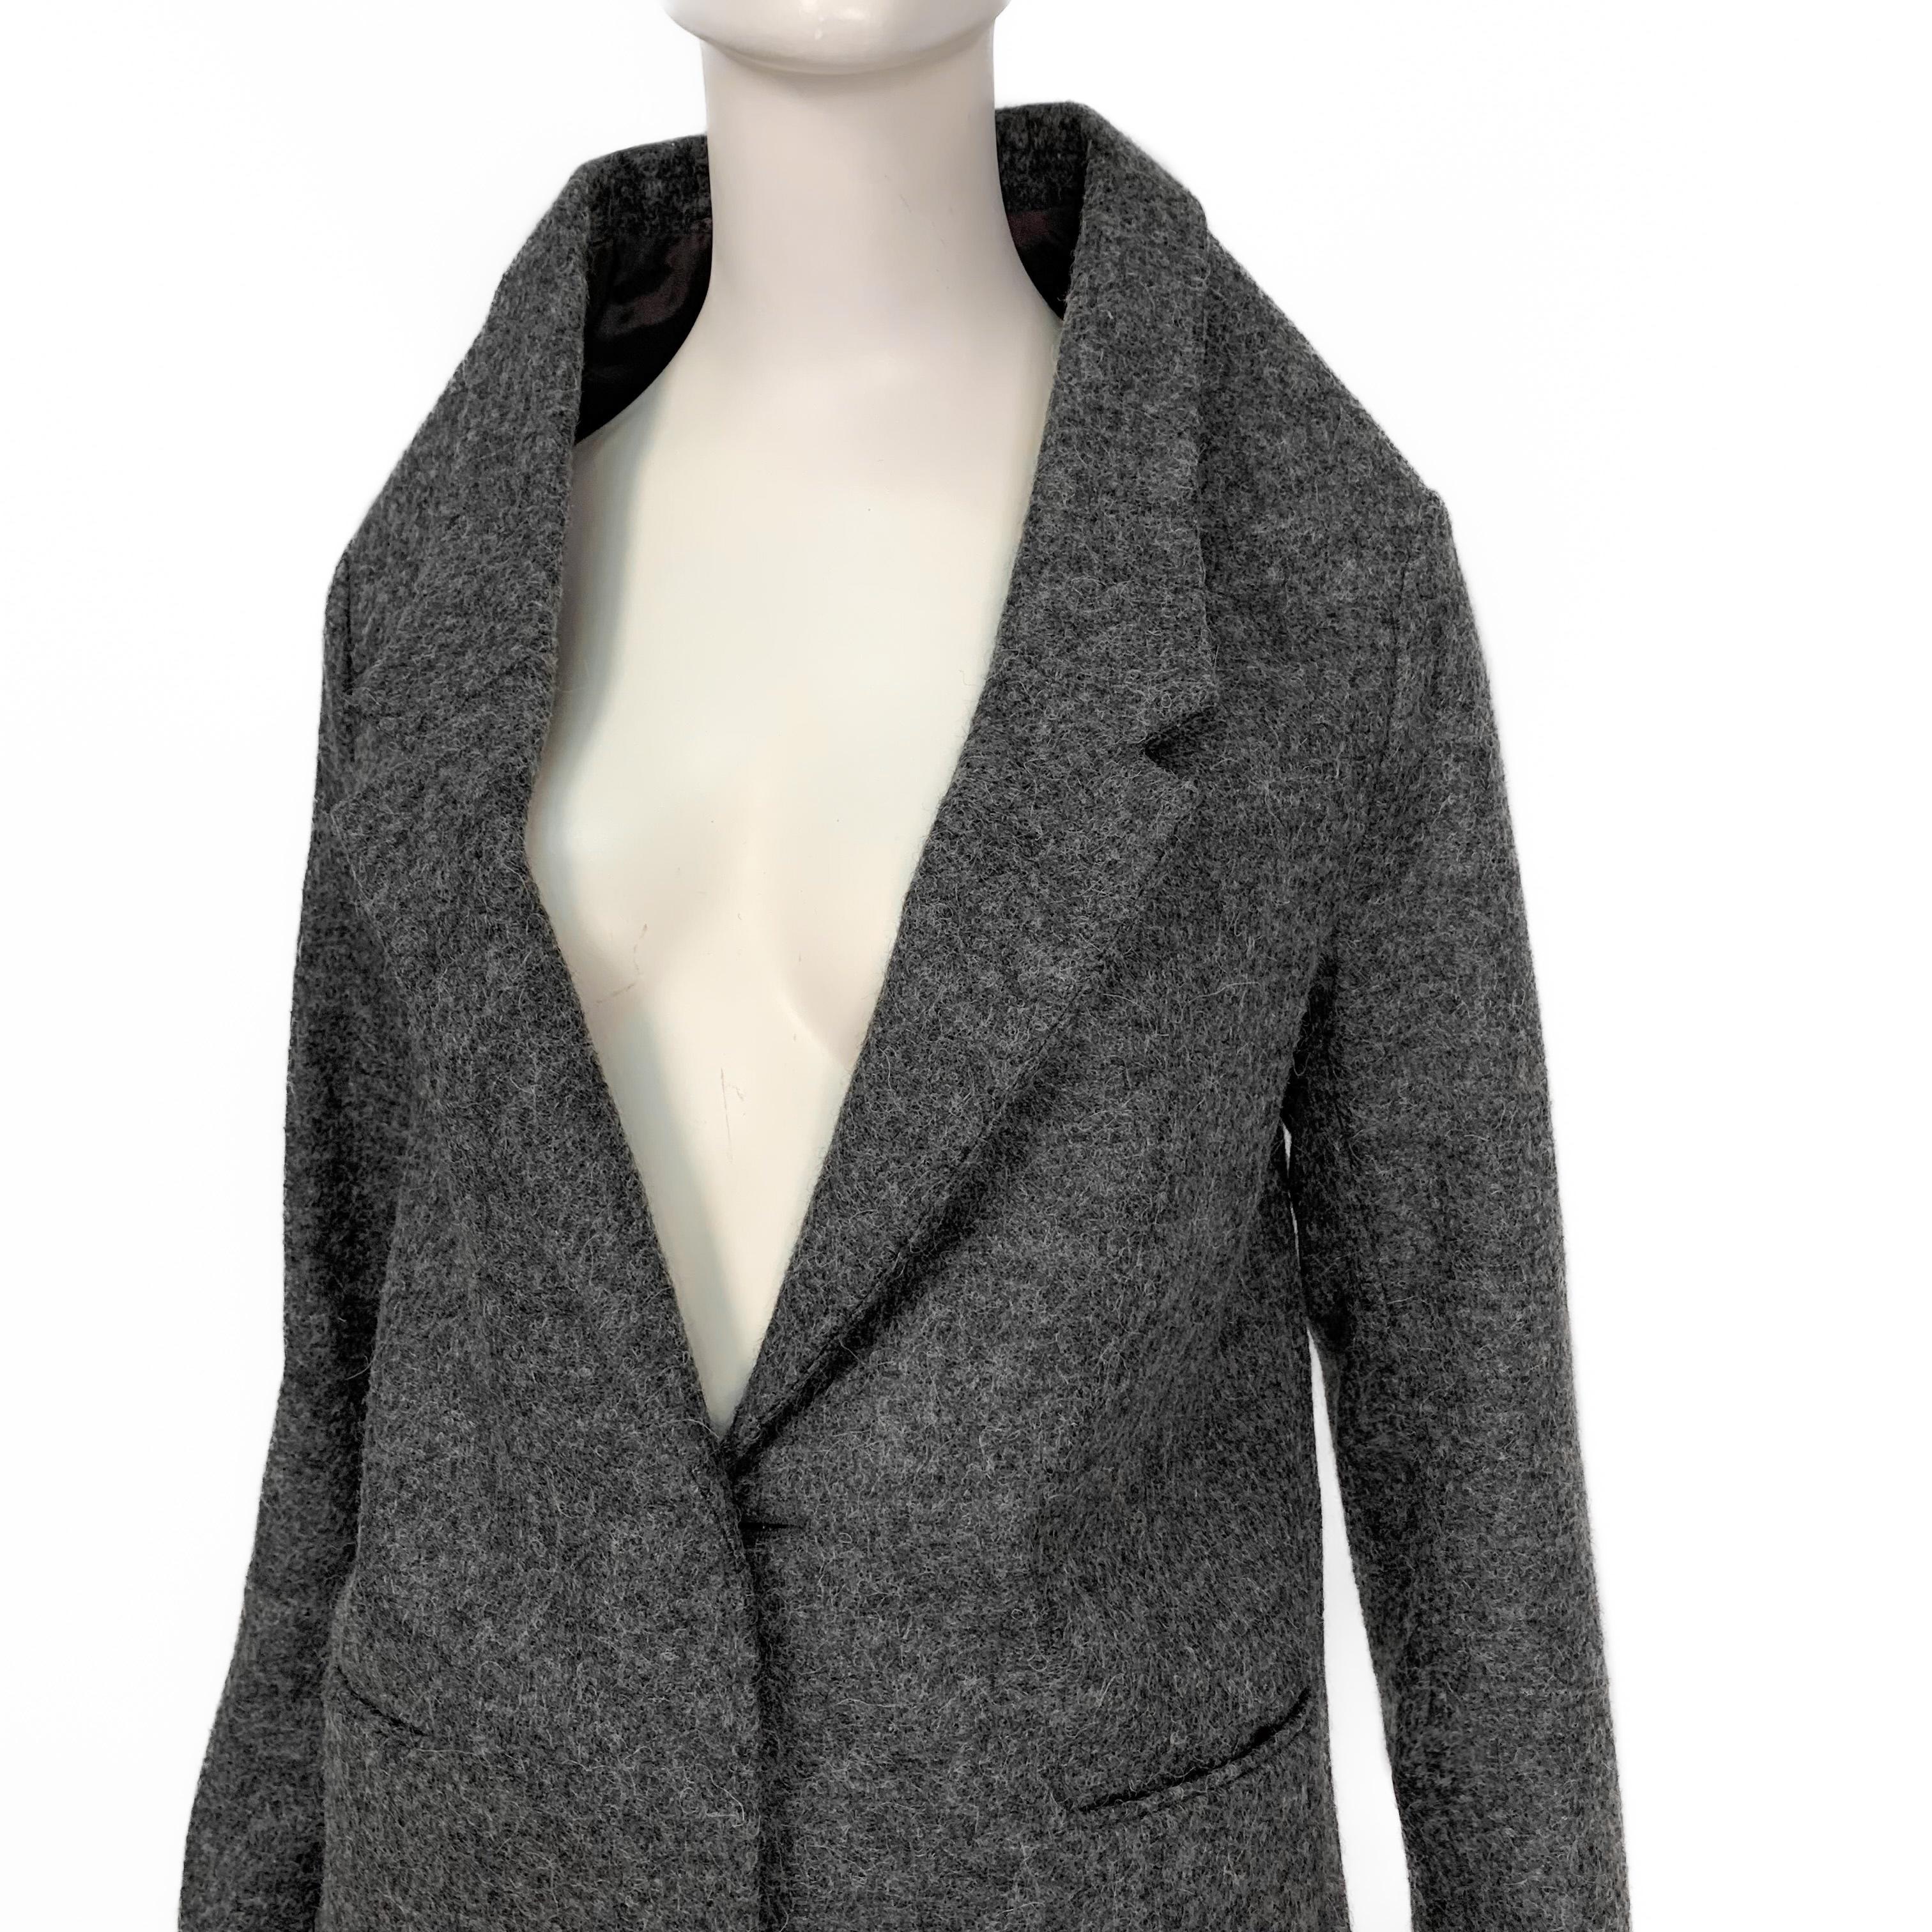 AW 2010 mr. Margiela's last RTW collection grey wool deconstructed blazer In Excellent Condition For Sale In TARRAGONA, ES